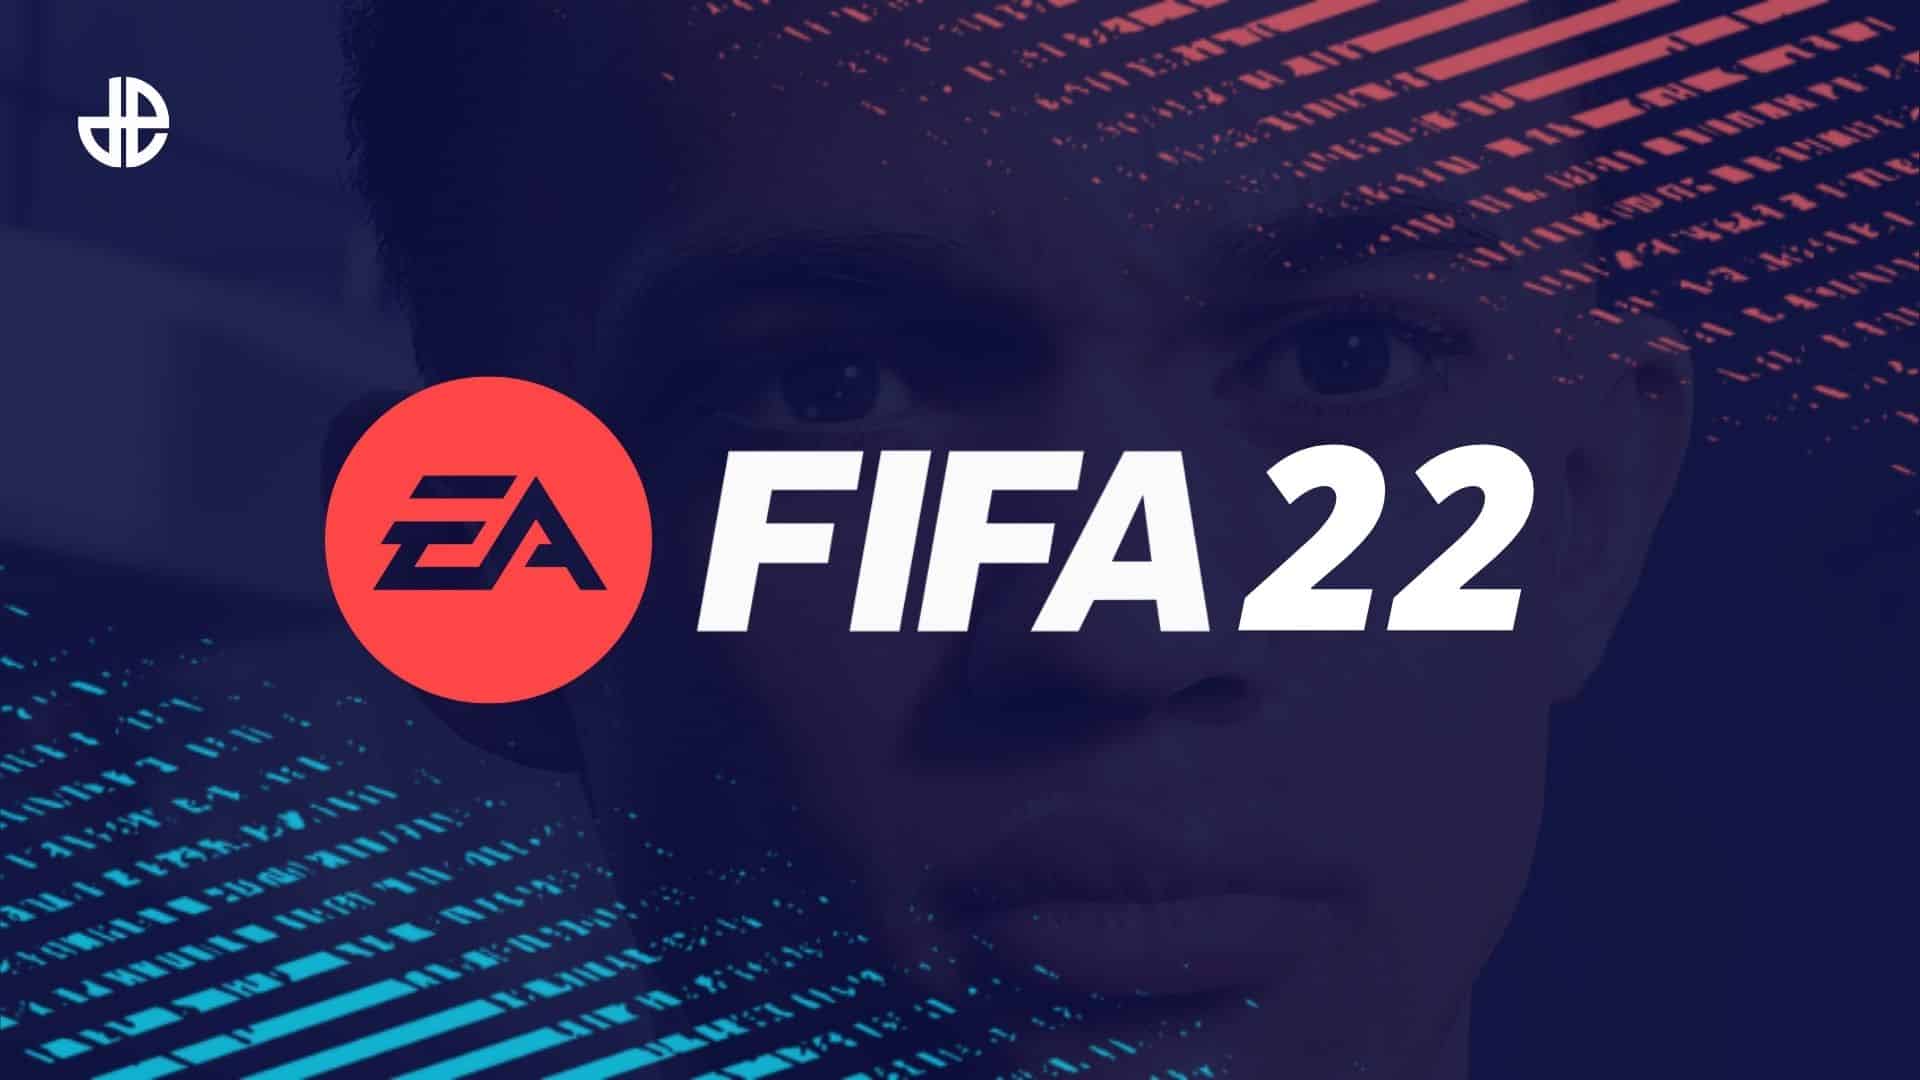 FIFA 22 EA Play 2021 How to watch, schedule, leaks and Hypermotion Technology